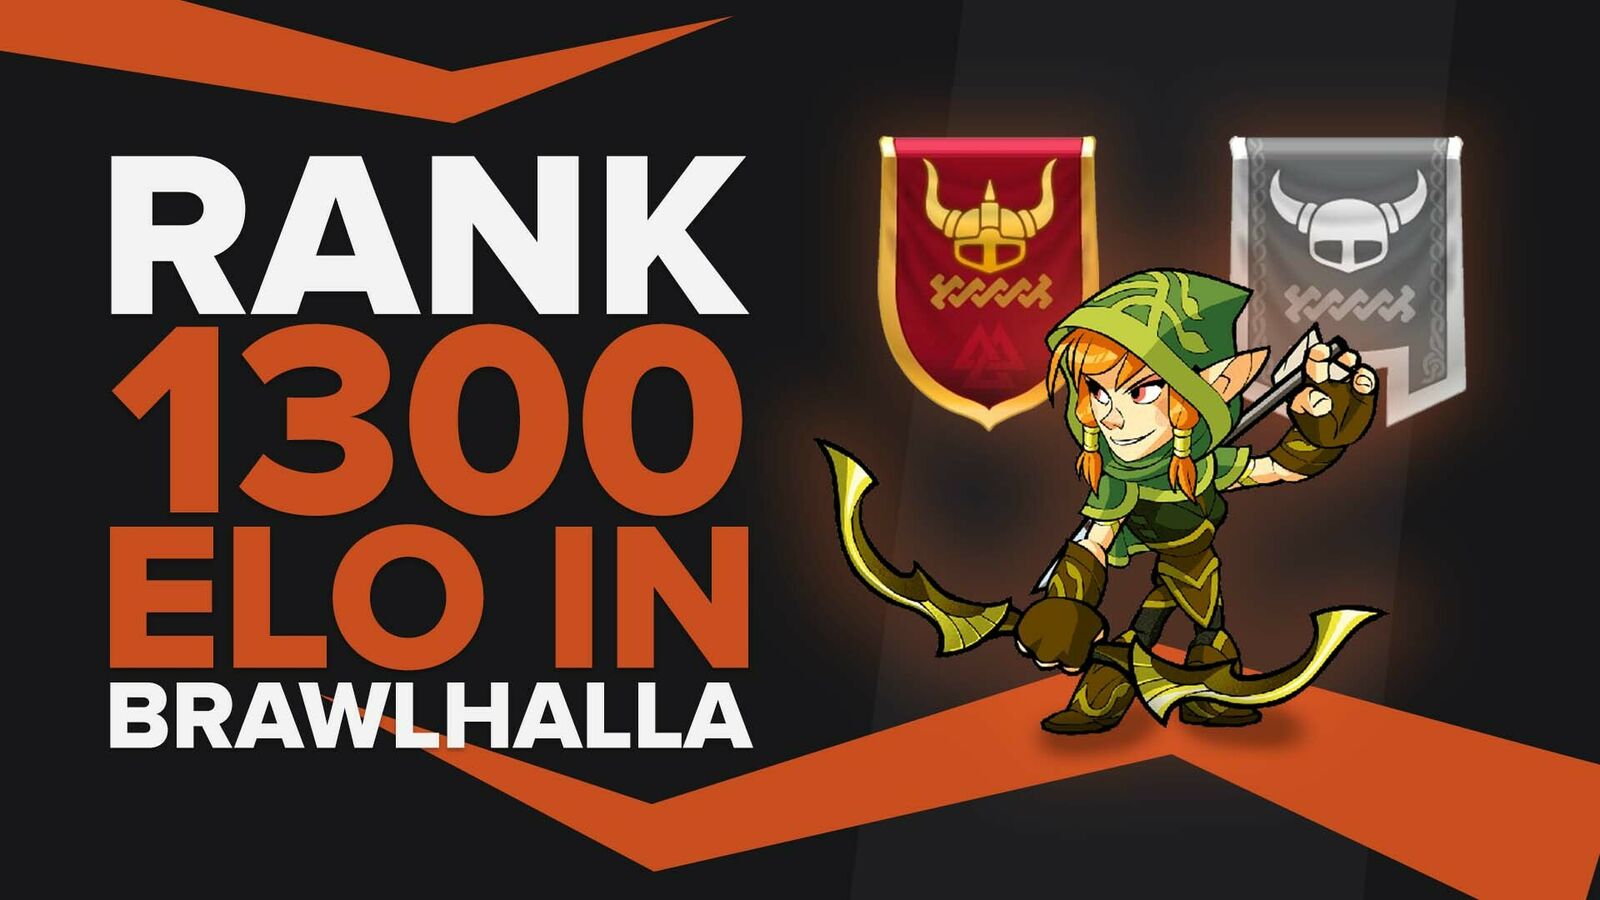 What rank is 1300 Elo in Brawlhalla?